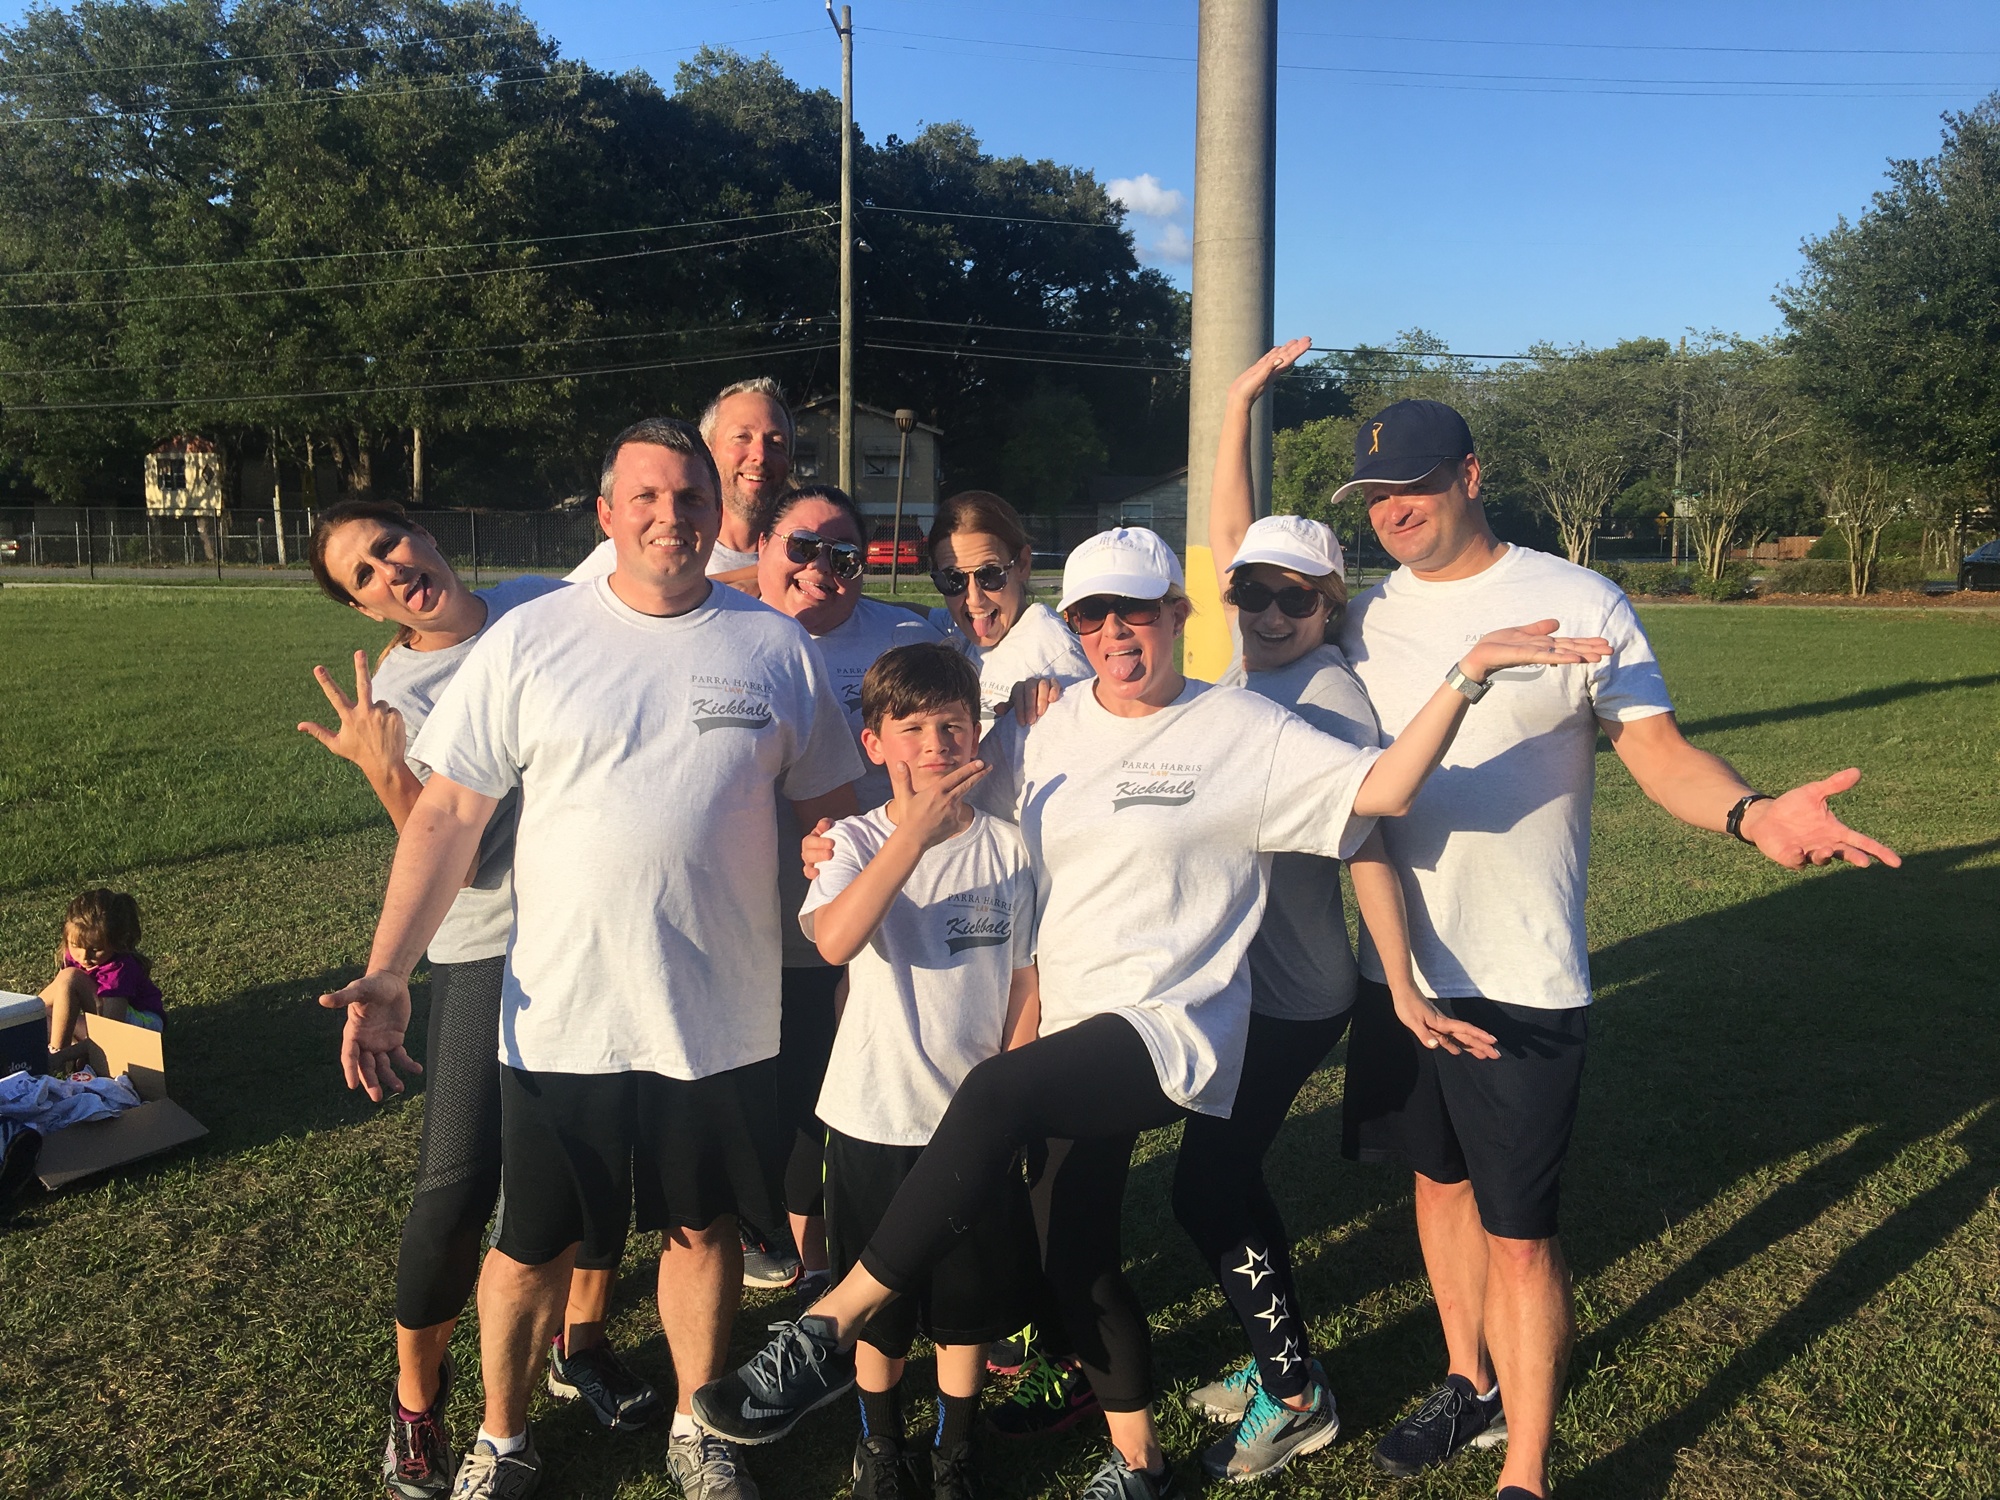 New Kicks on the Block show what it takes to compete in the Jacksonville Bar Association Kickball League.